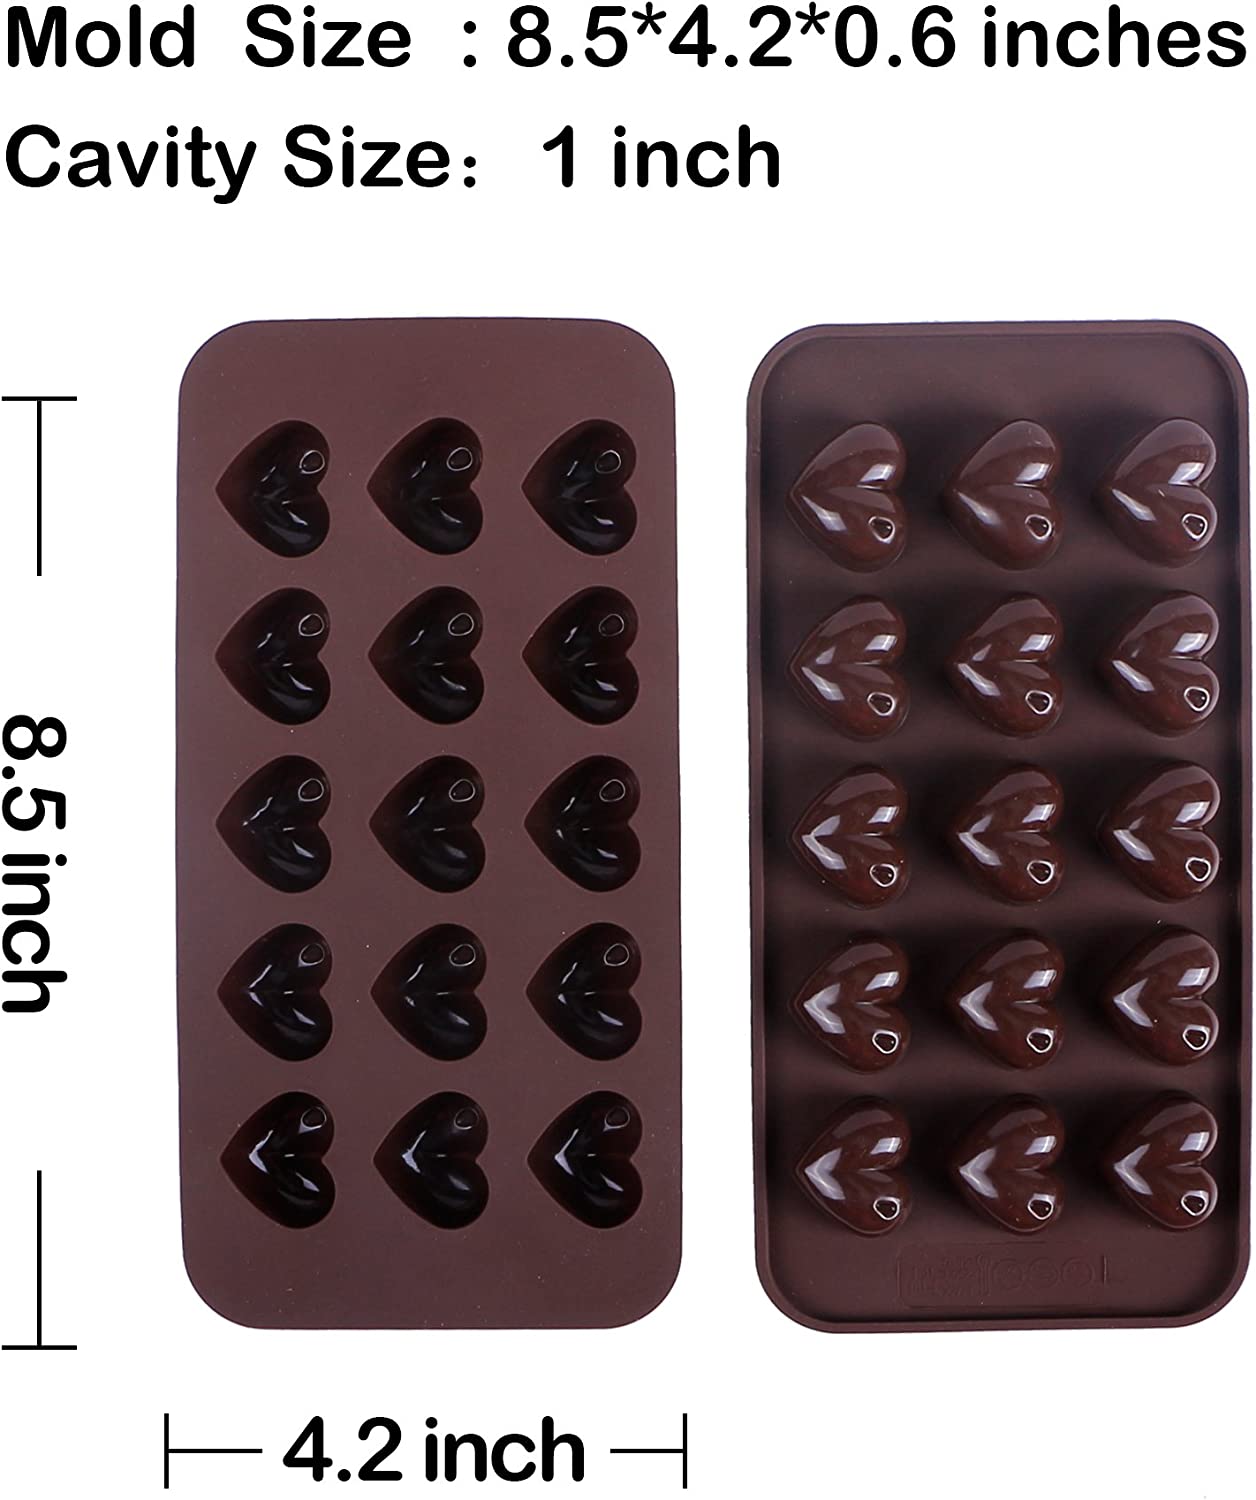 Webake cylinder chocolate molds silicone for jello and keto fat bombs (2  pack)